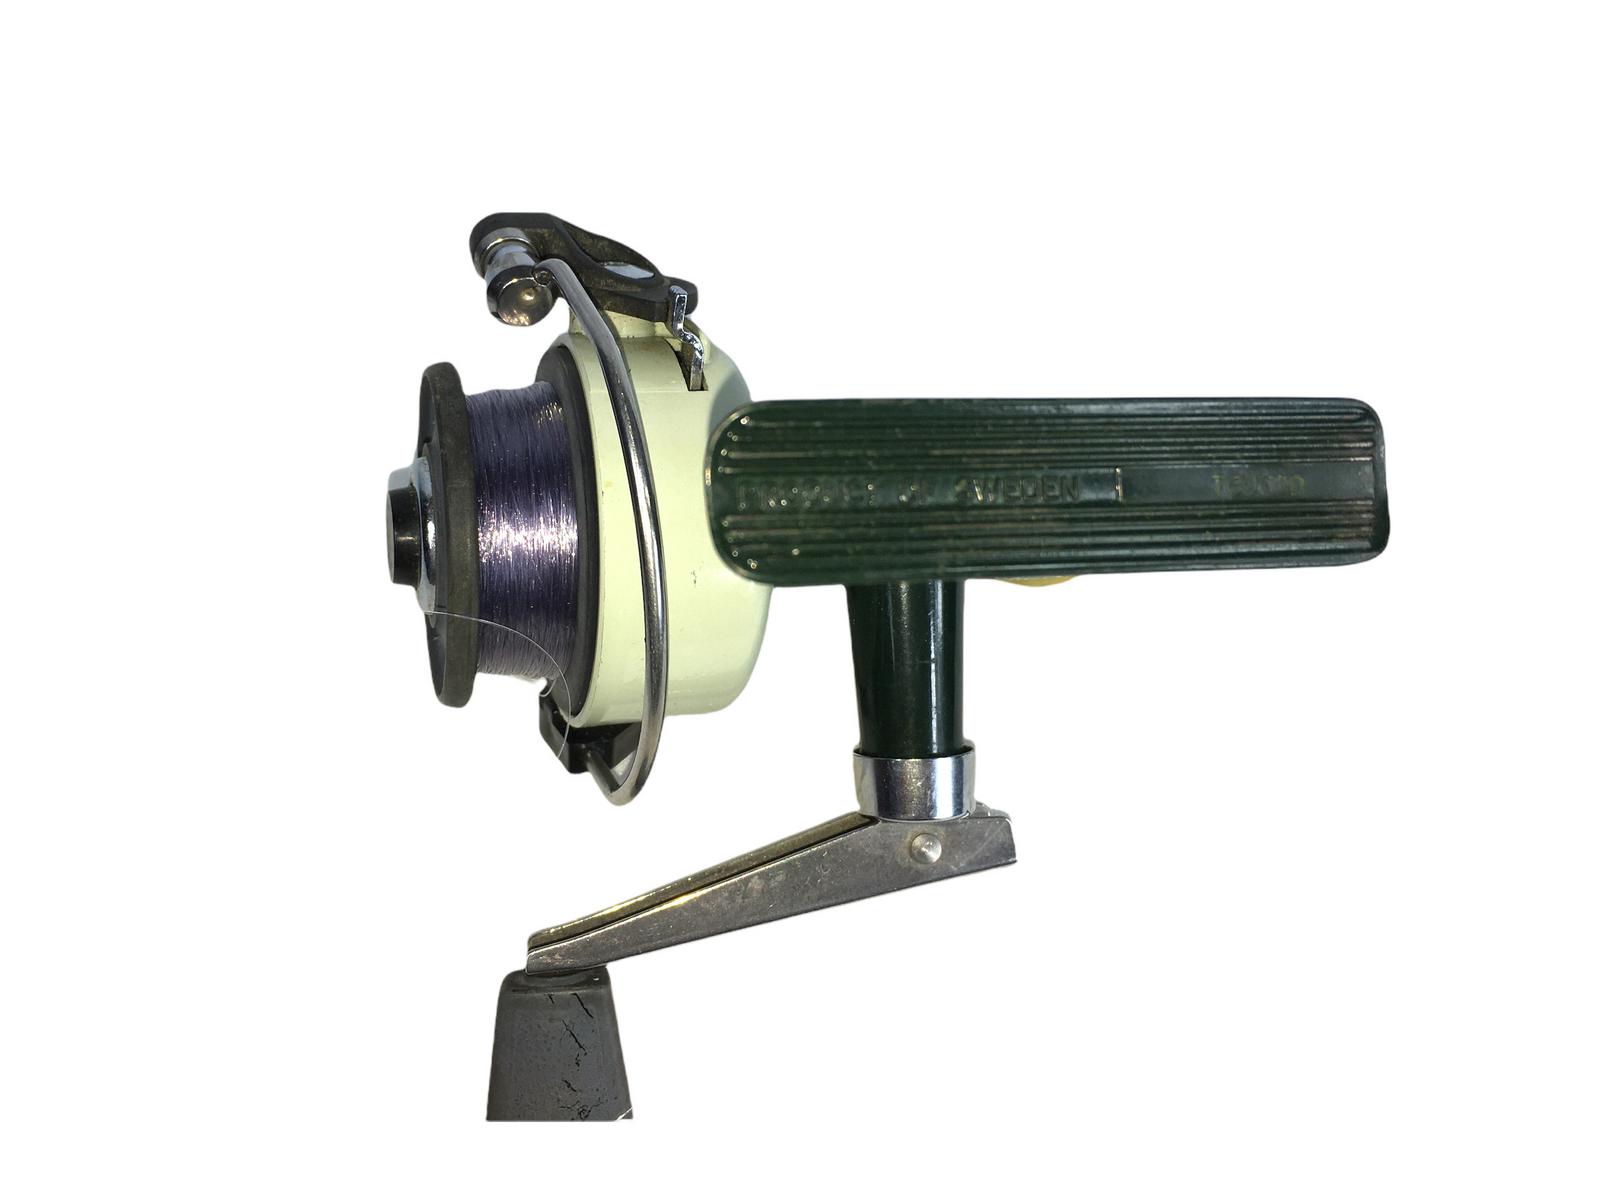 VINTAGE Zebco Cardinal 3 Spinning Fishing Reel SWEDEN 750400 W/ SPARE SPOOL  - National Chamber of Exporters of Sri Lanka